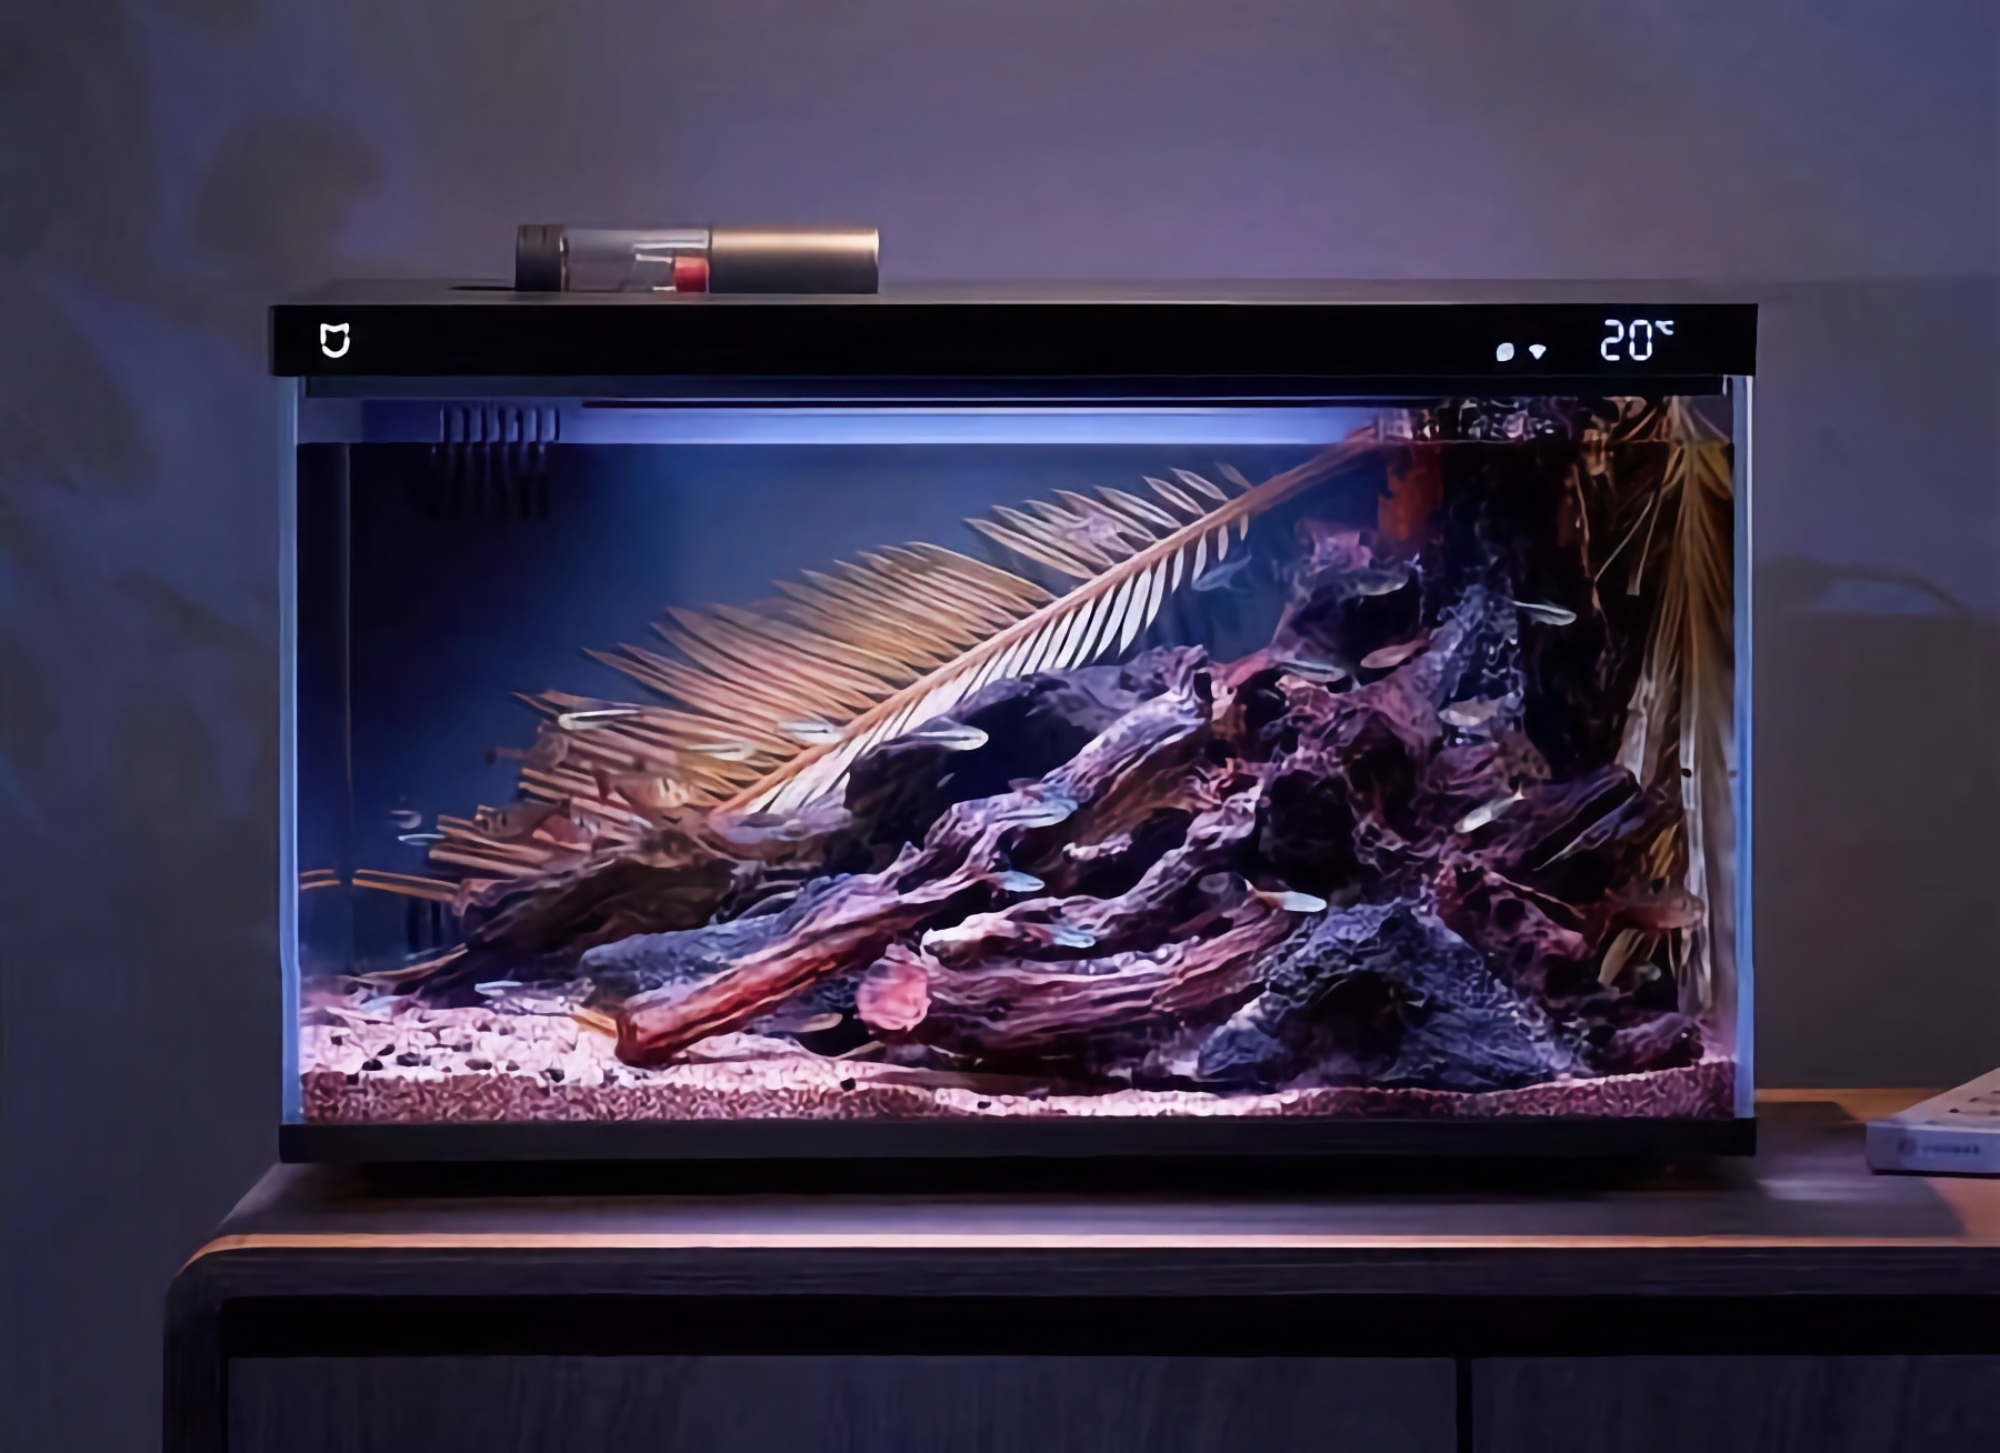 Xiaomi introduced a smart aquarium with a water filter, temperature sensor, RGB-lighting and remote feeding function